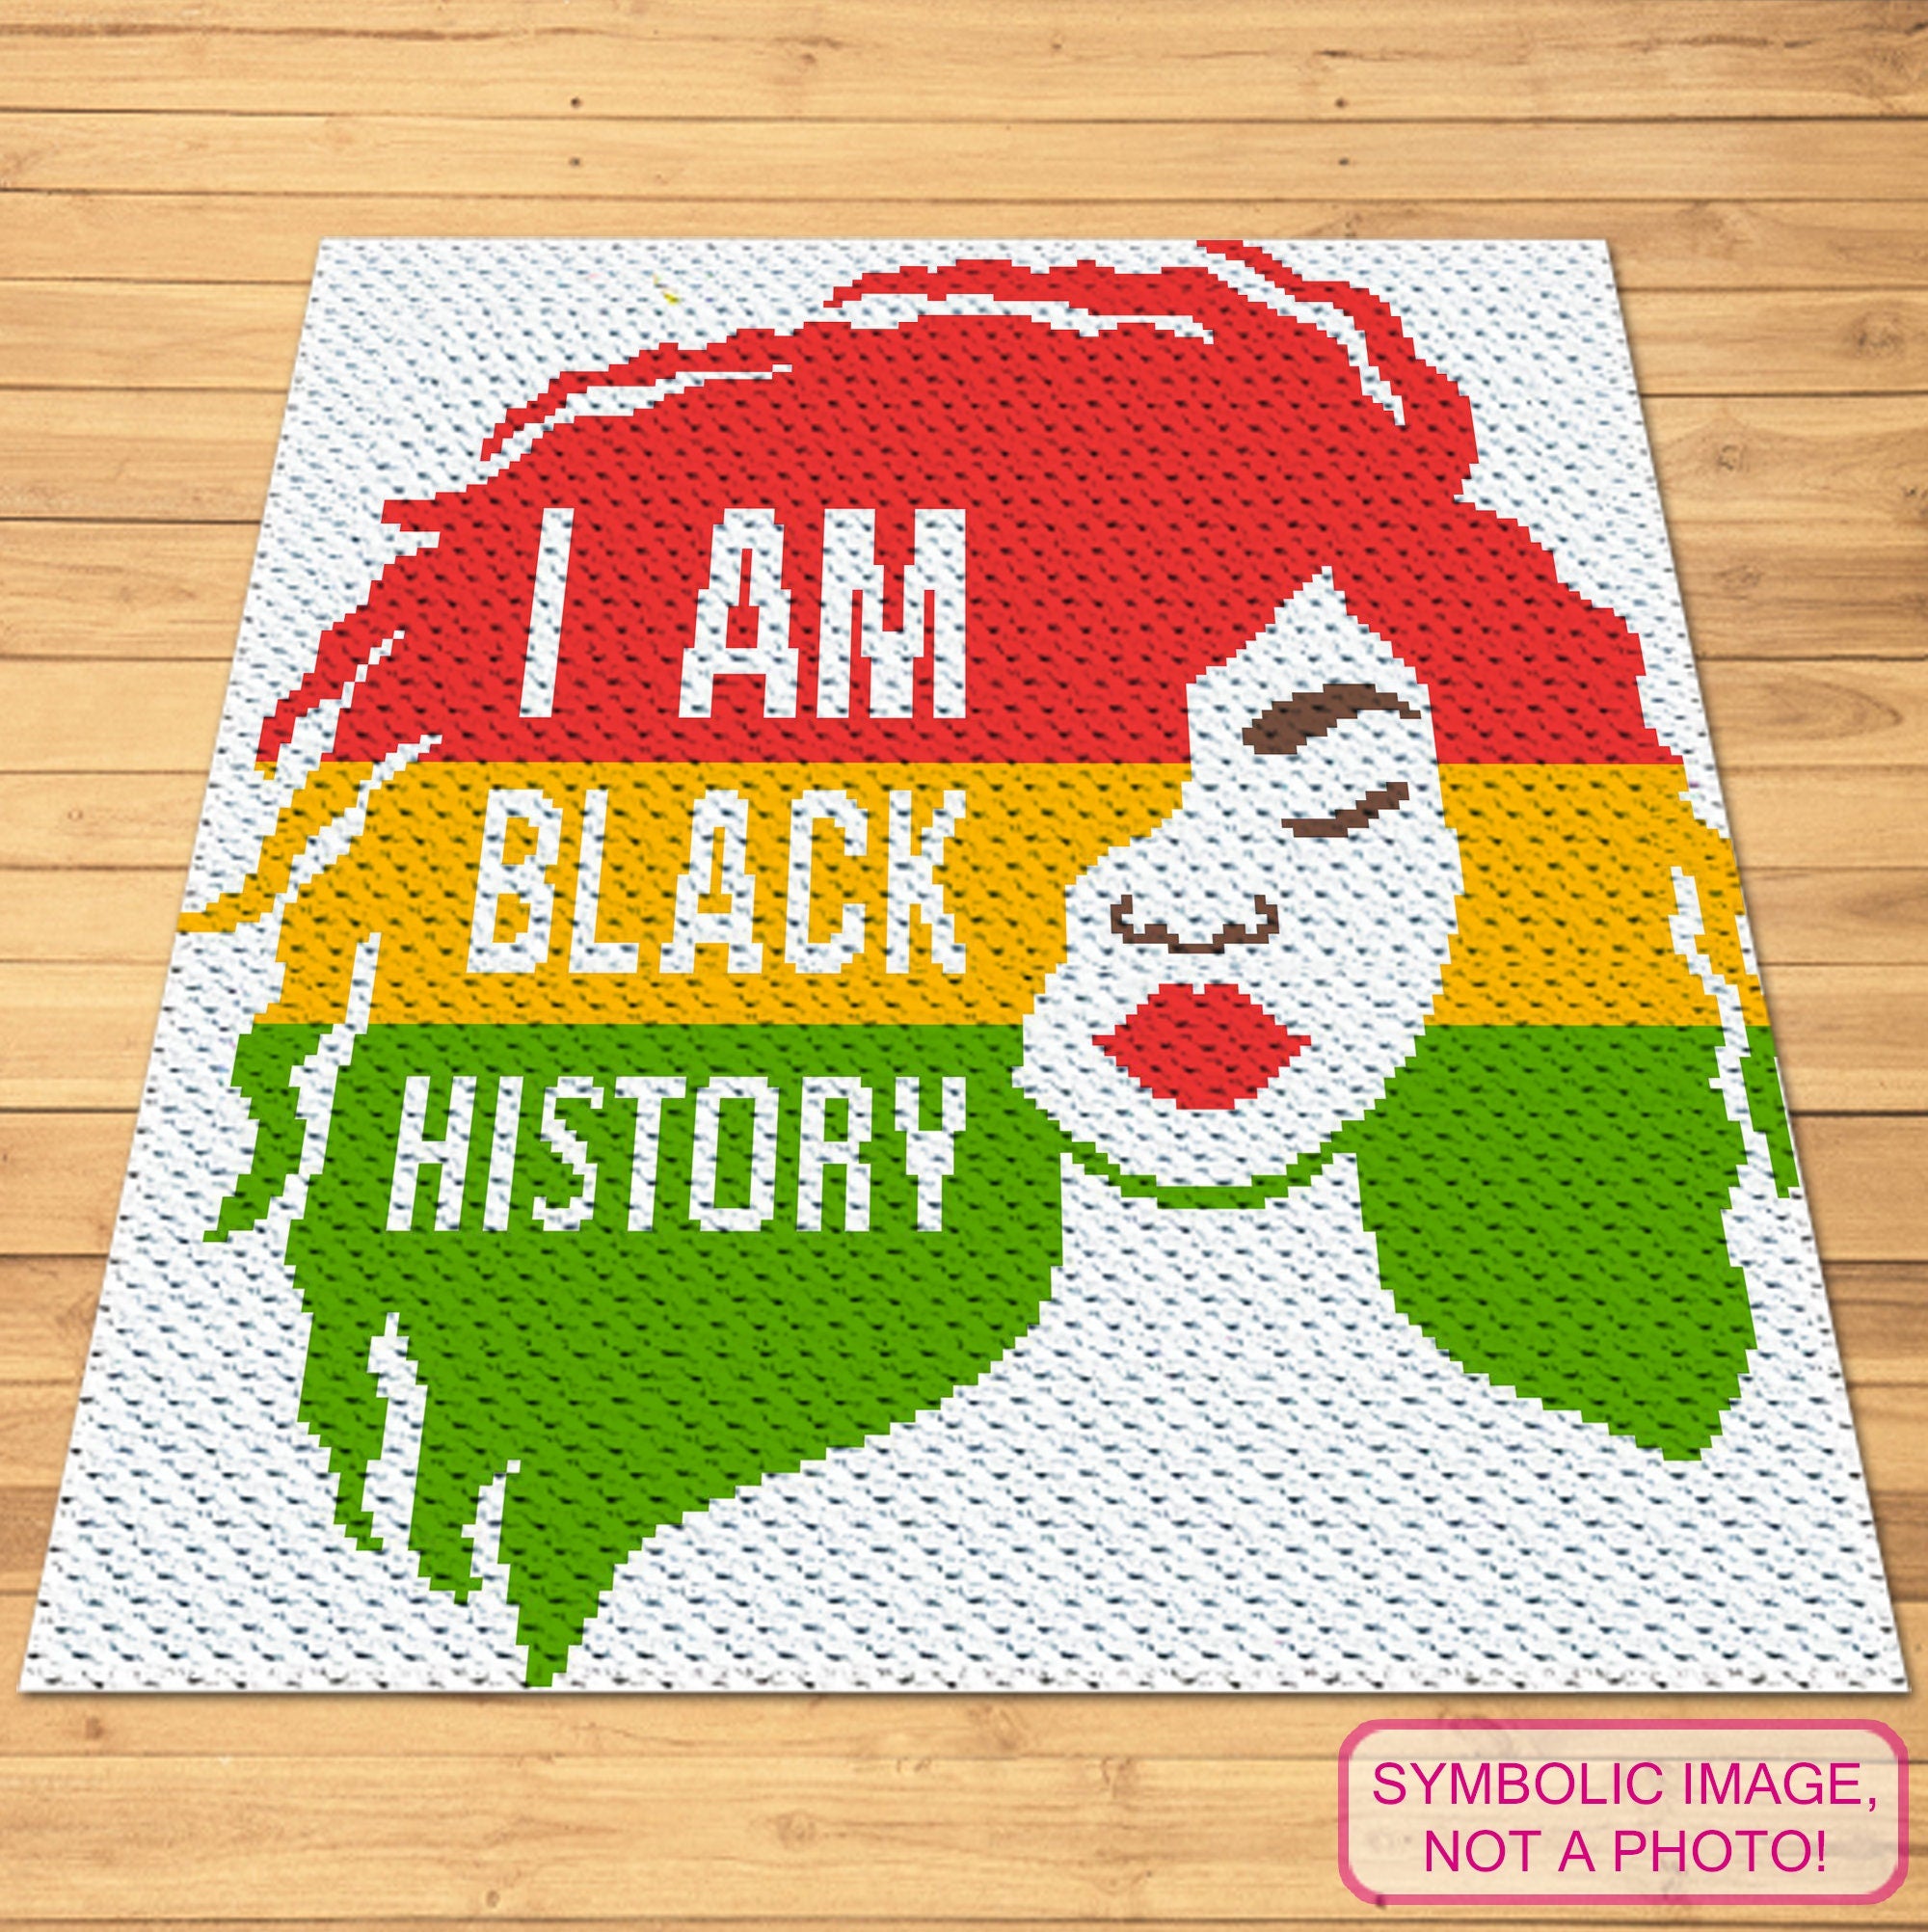 I Am Black History Crochet Blanket - Embrace heritage, embody strength! African-inspired, vibrant pattern. Stitch pride & empowerment. African Crochet is a C2C Graphgan Pattern with Written Instructions, PDF Digital Files. Click to learn more!